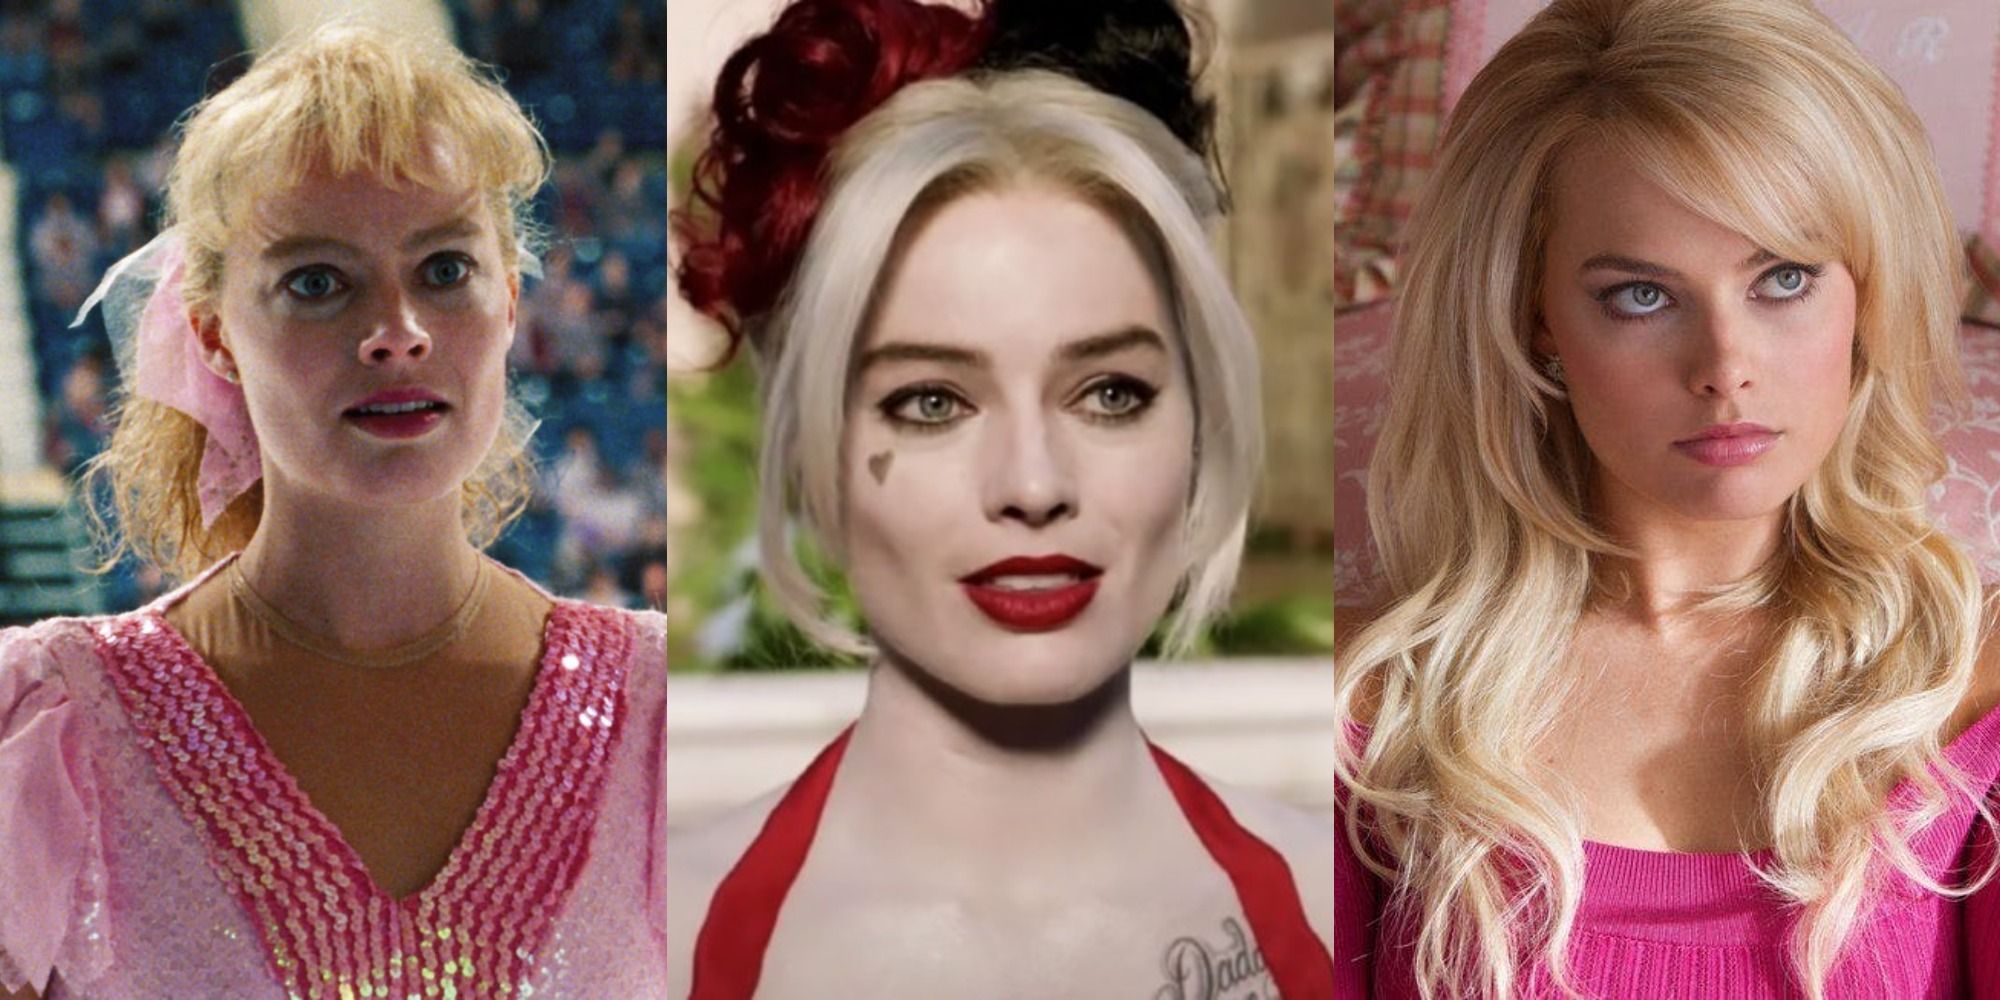 Split image depicting three Margot Robbie performances: I, Tonya, The Suicide Squad, and The Wold of Wall Street